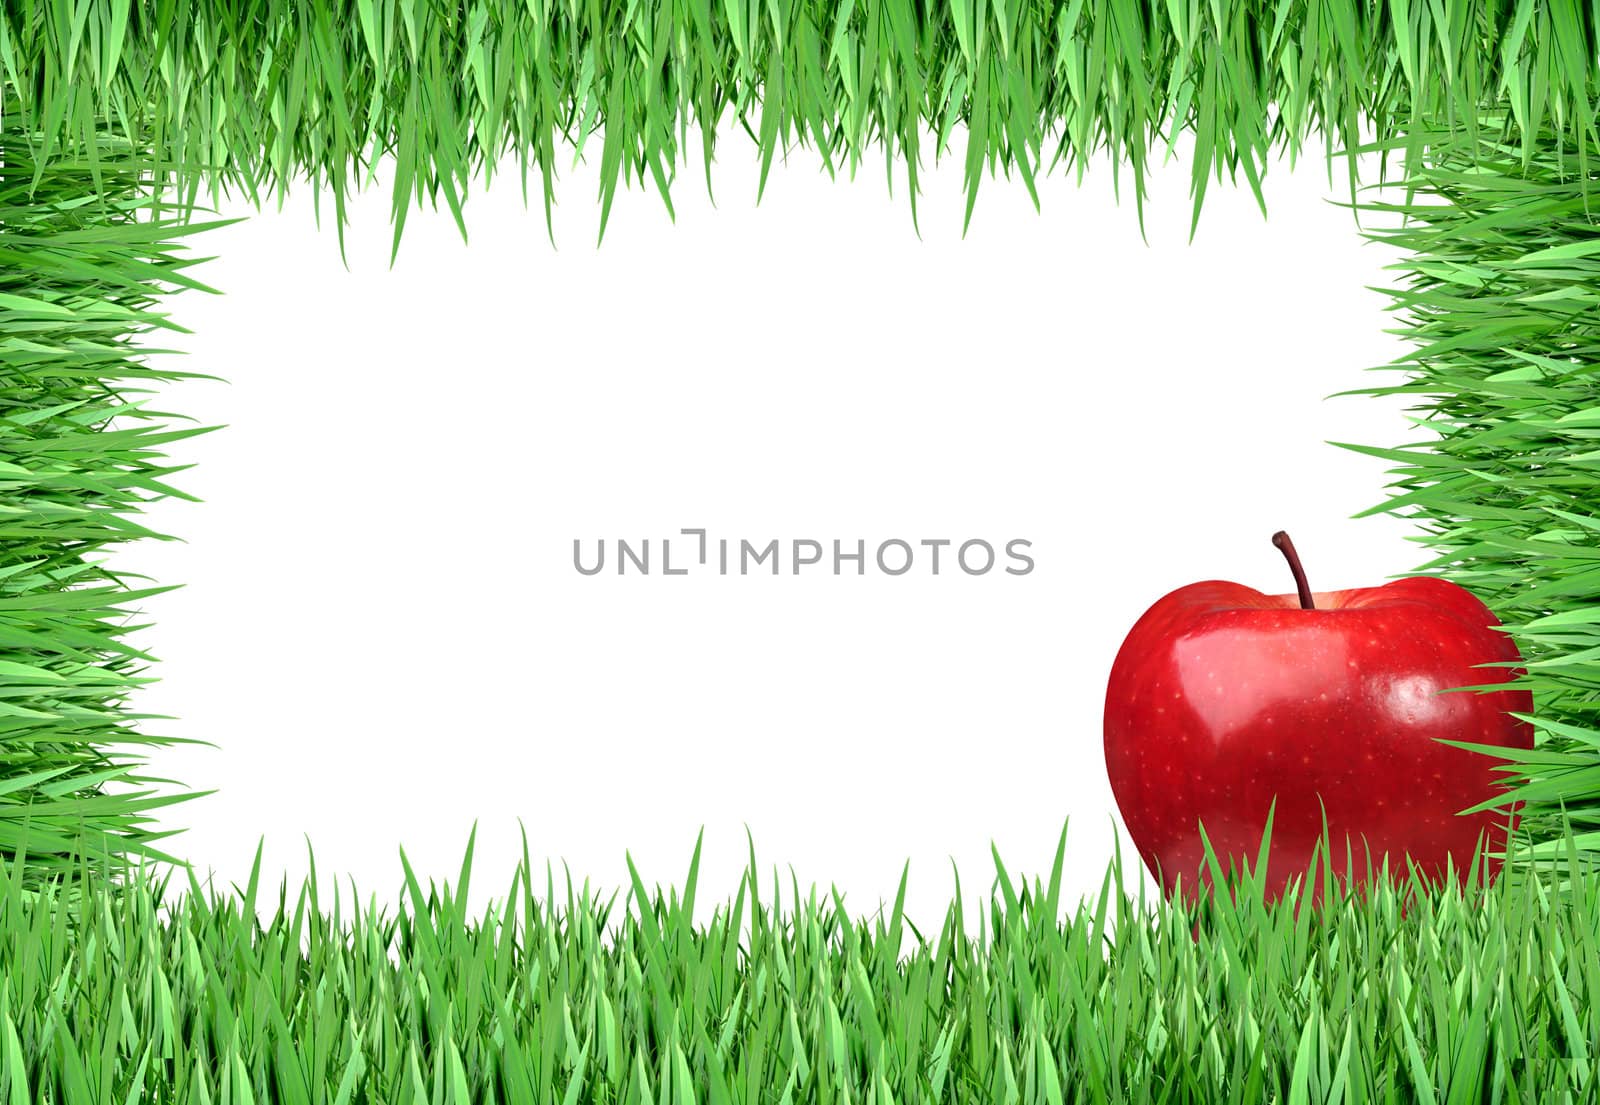 Over view of grass on white background